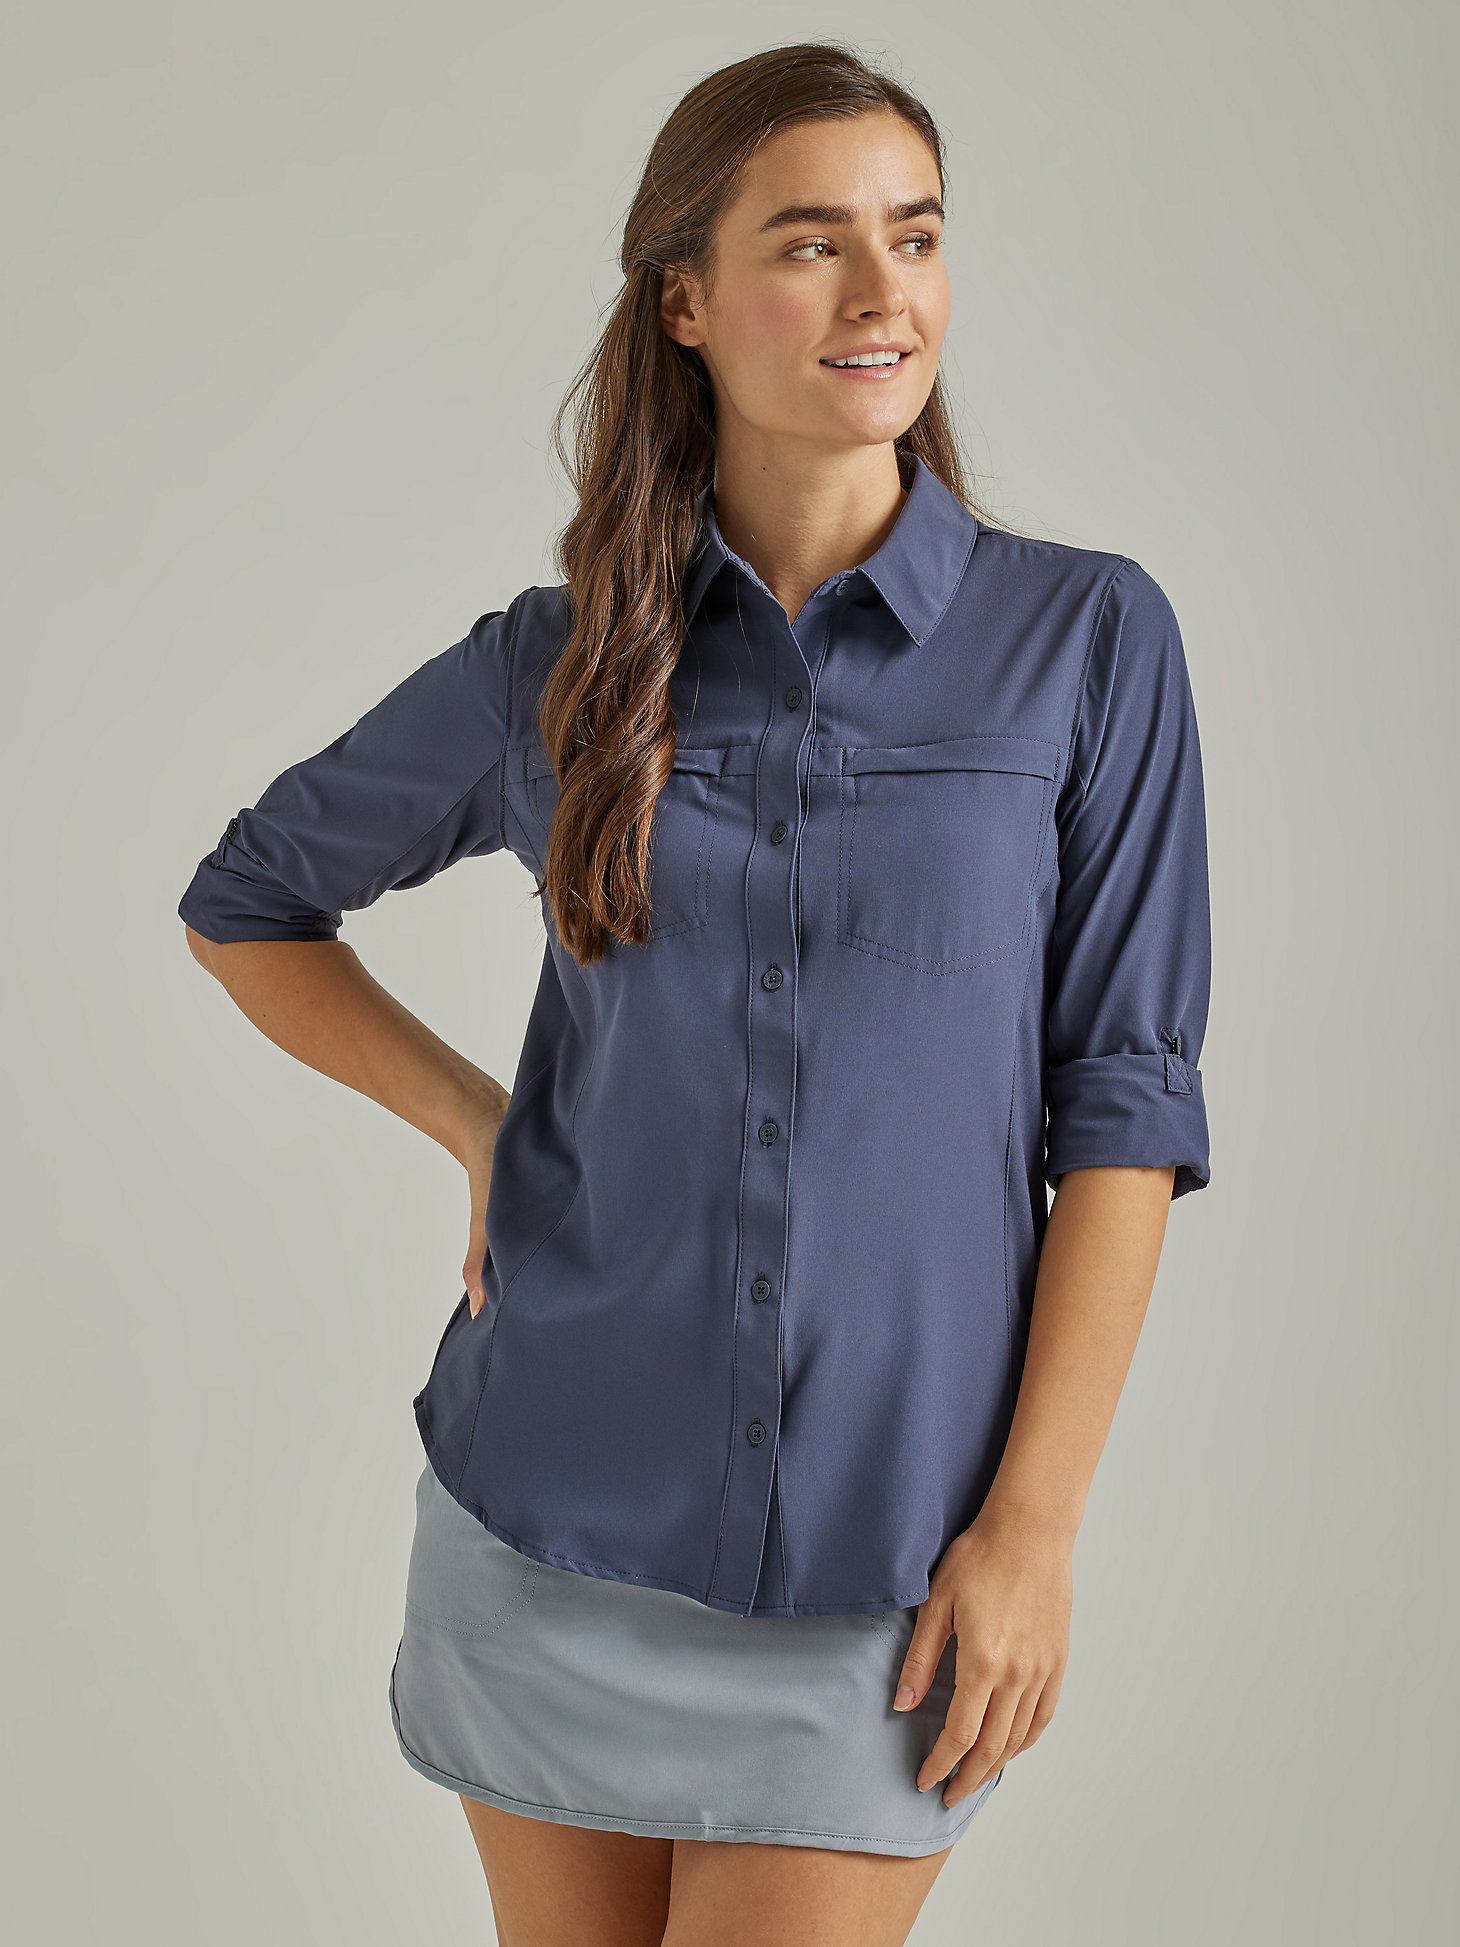 ATG By Wrangler® Women's Trail Shirt in Blue Nights main view